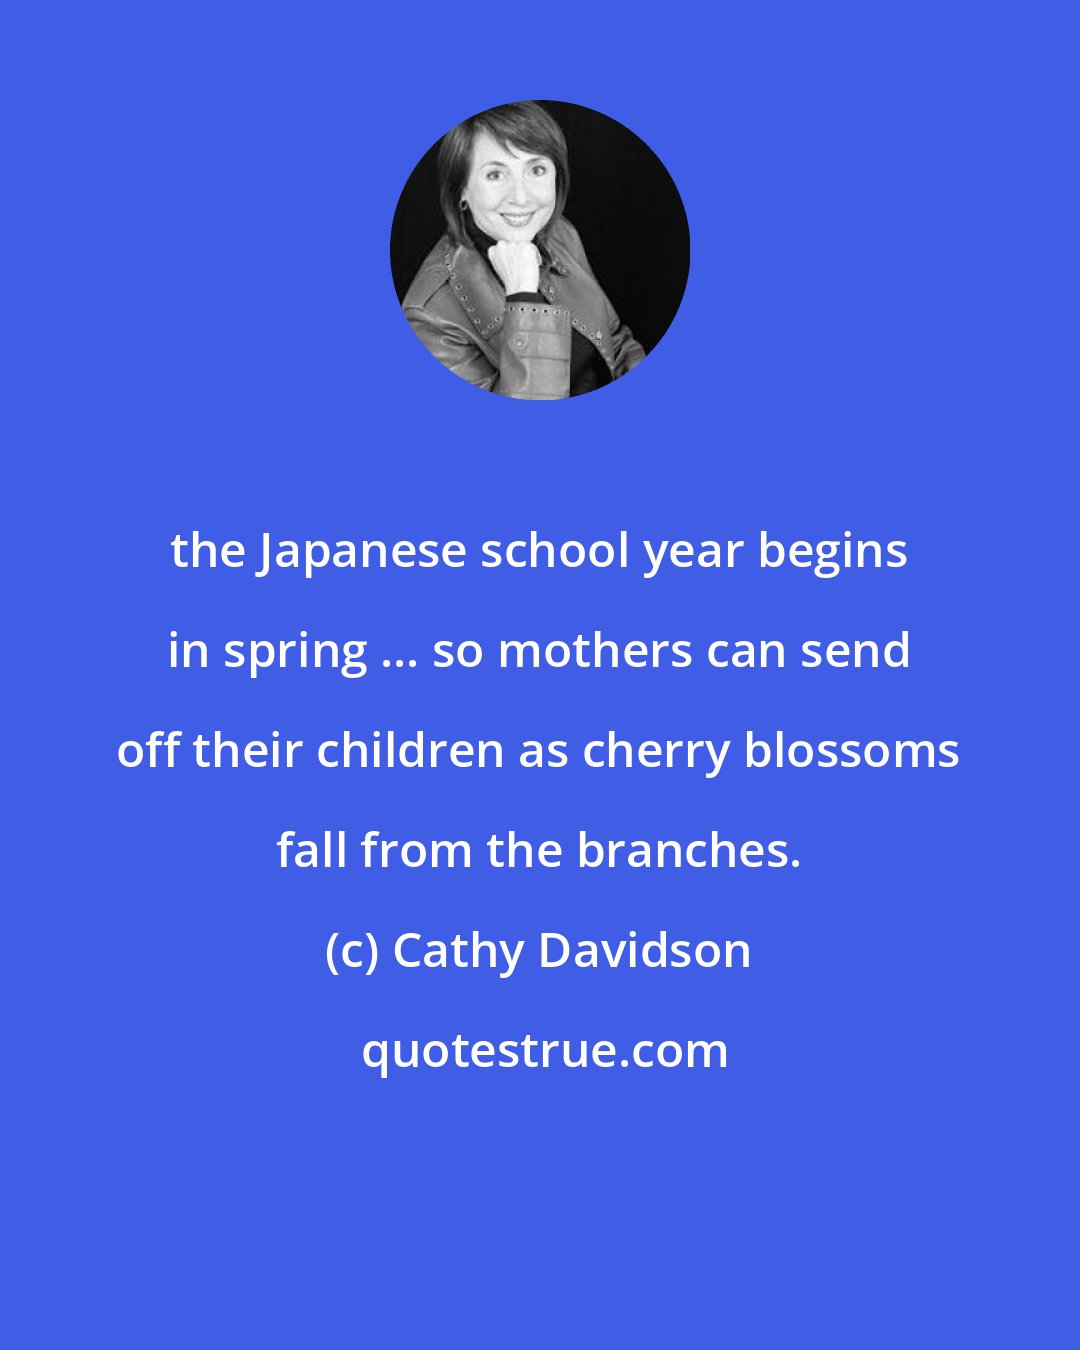 Cathy Davidson: the Japanese school year begins in spring ... so mothers can send off their children as cherry blossoms fall from the branches.